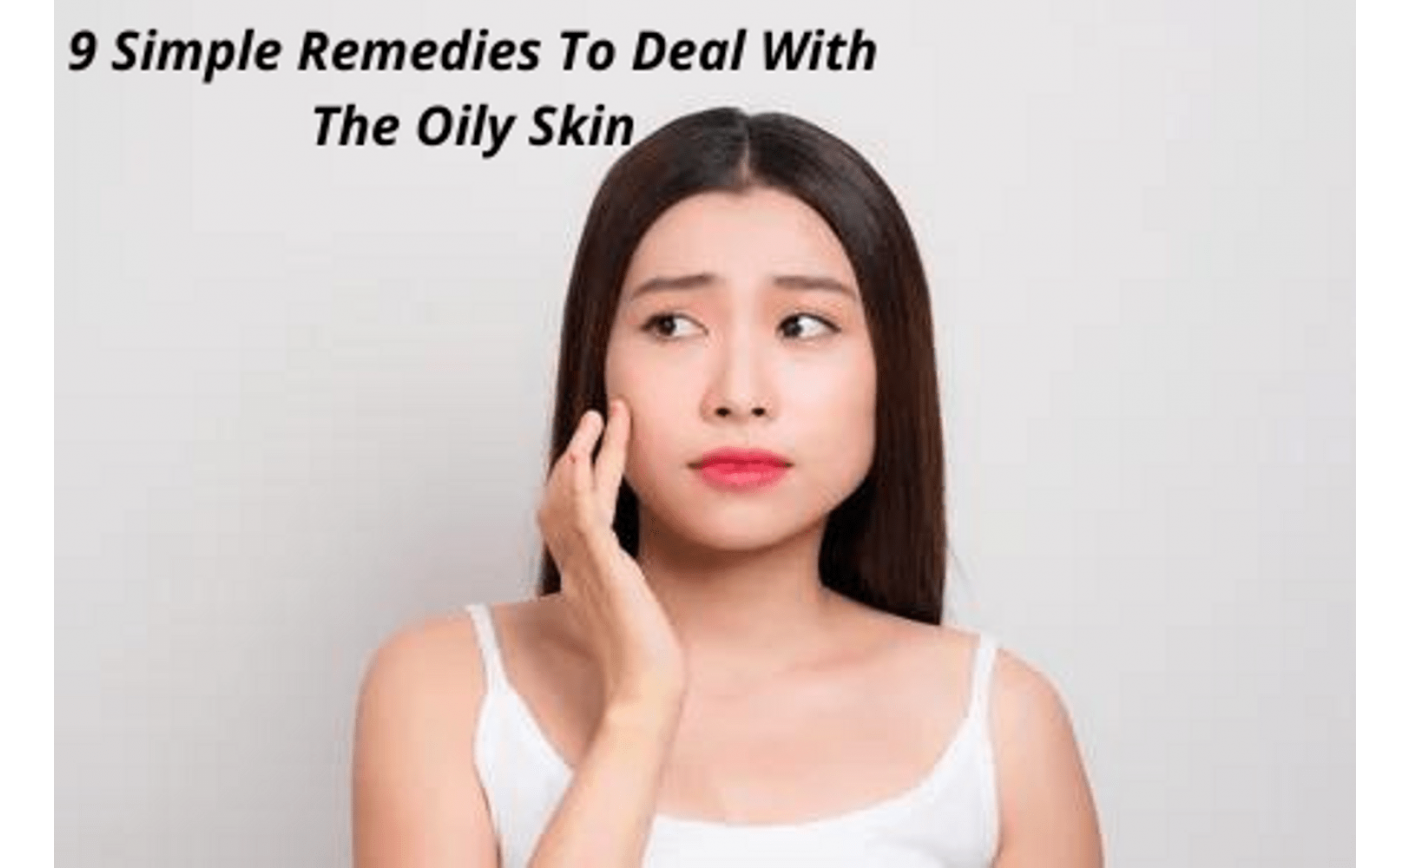 9 Simple Remedies To Deal With The Oily Skin